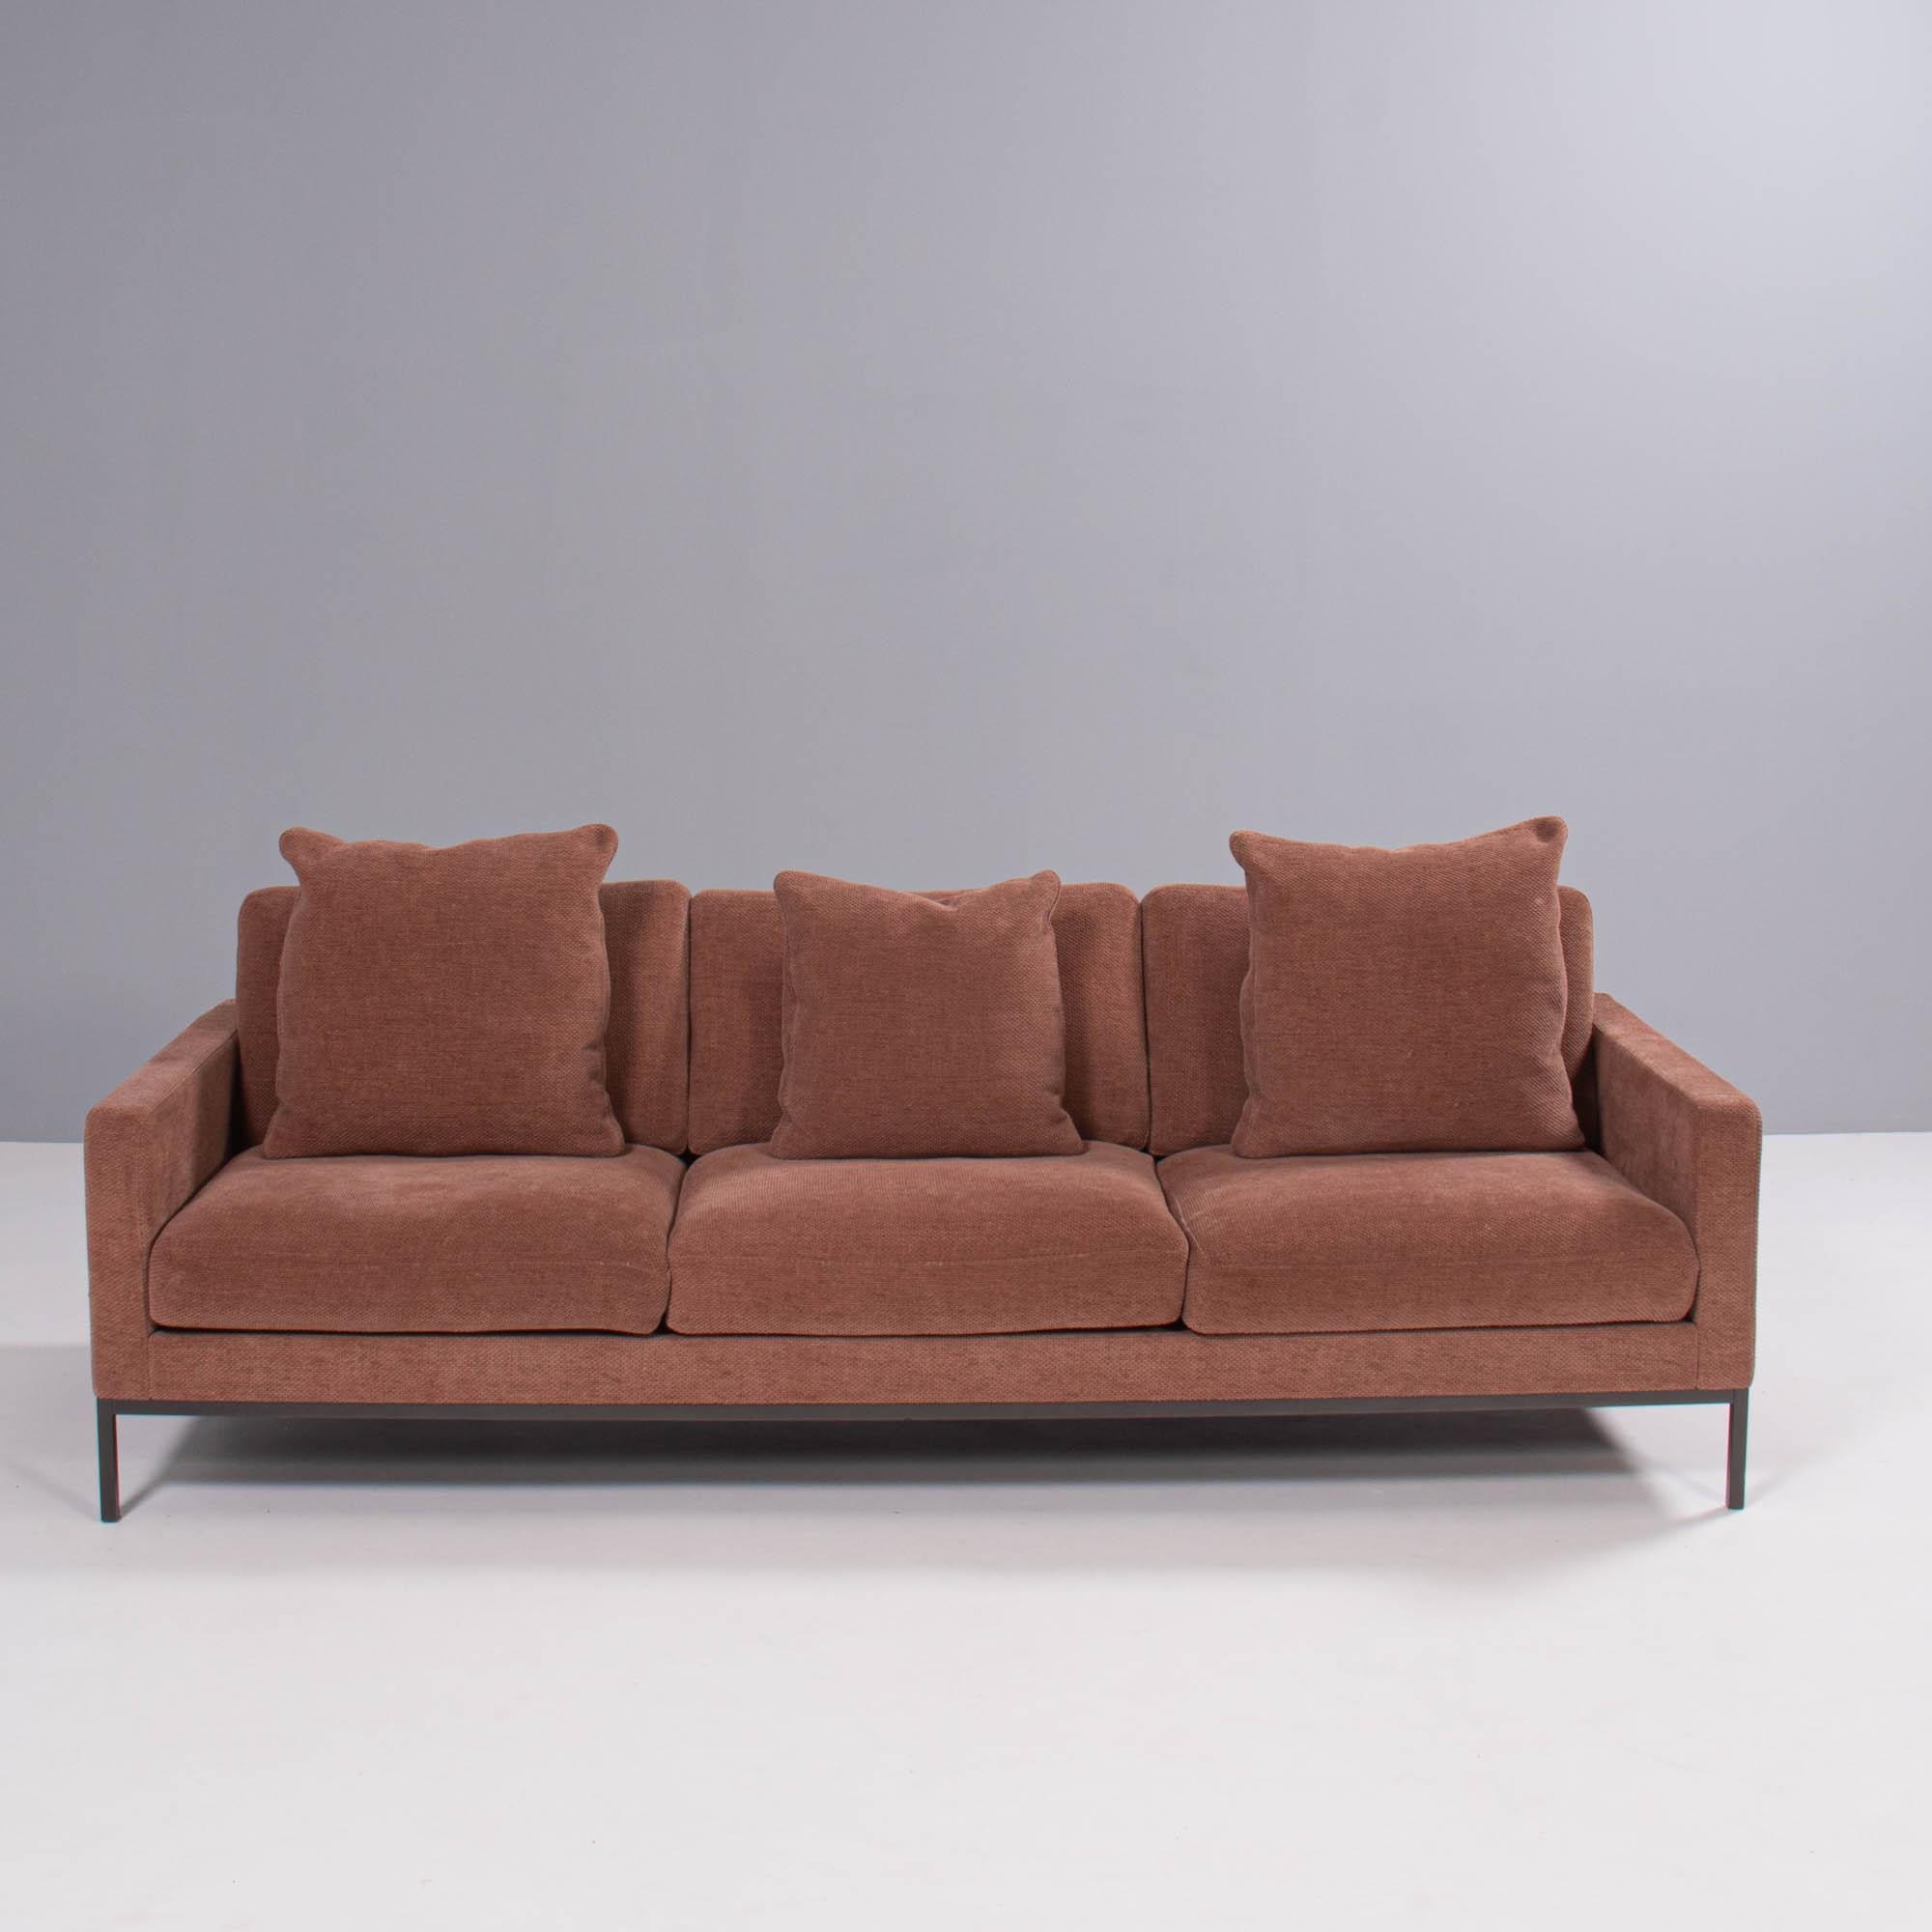 Originally designed by Florence Knoll in 1954, this sofa is a fantastic example of the modern aesthetic of the era.

The design has since been updated to the Relax model which offers deeper seating and more comfort while maintaining the original